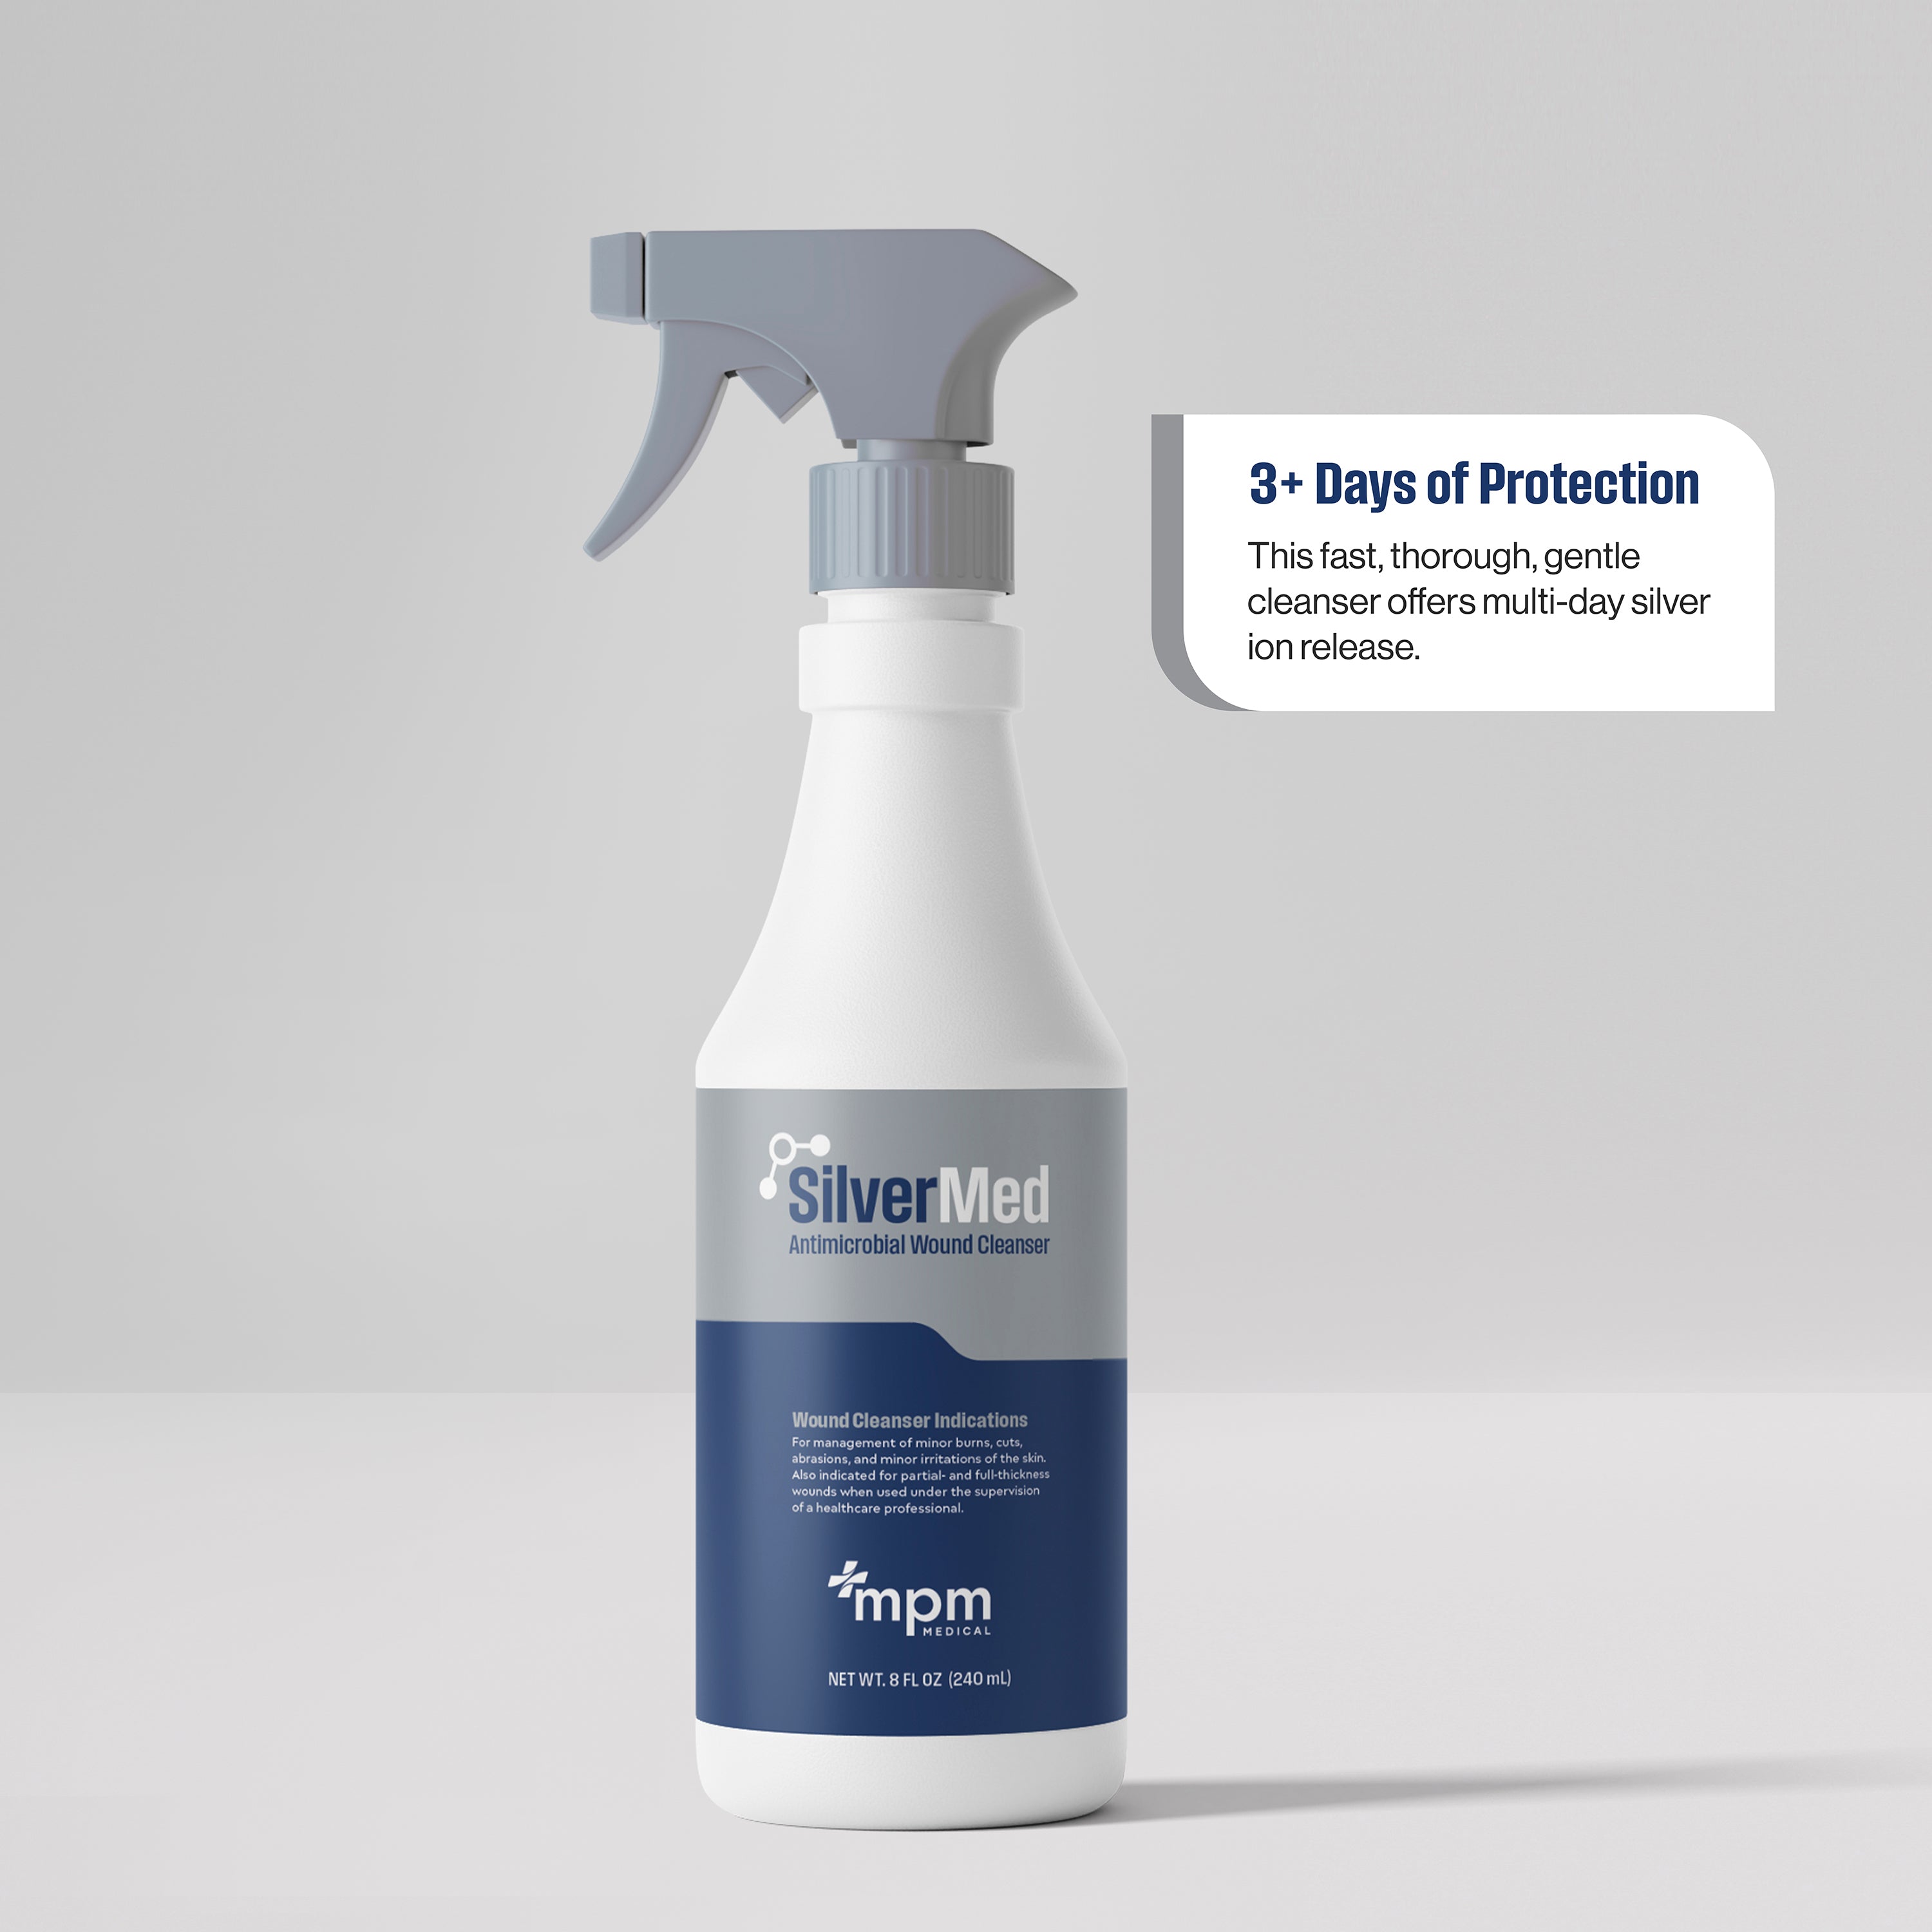 SilverMed™ Antimicrobial Wound Cleanser